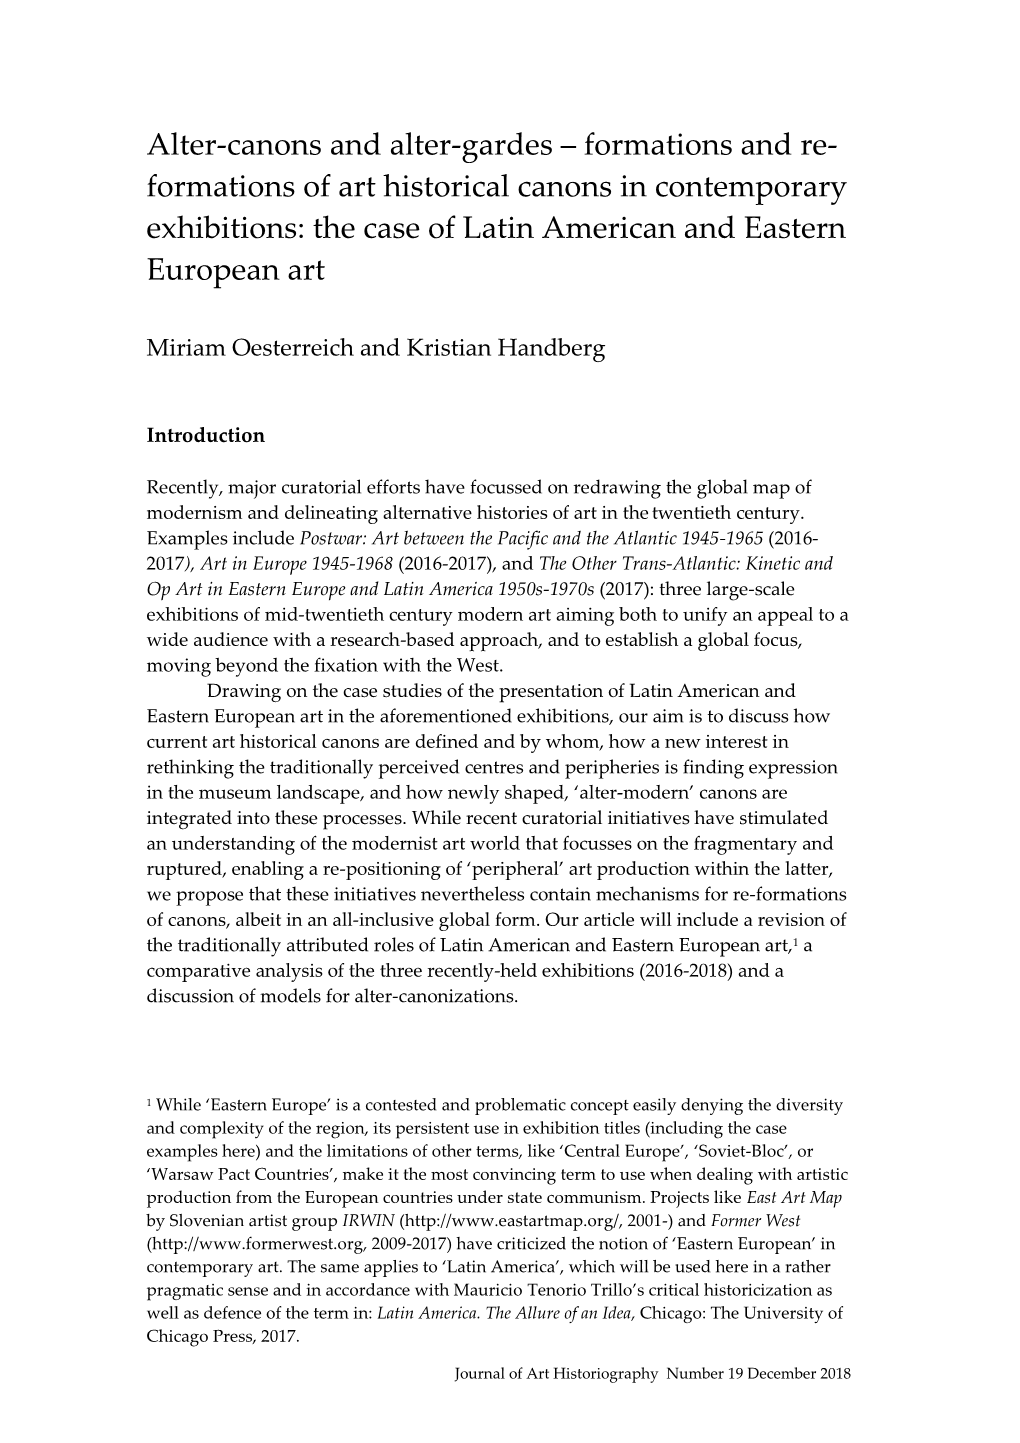 Formations of Art Historical Canons in Contemporary Exhibitions: the Case of Latin American and Eastern European Art